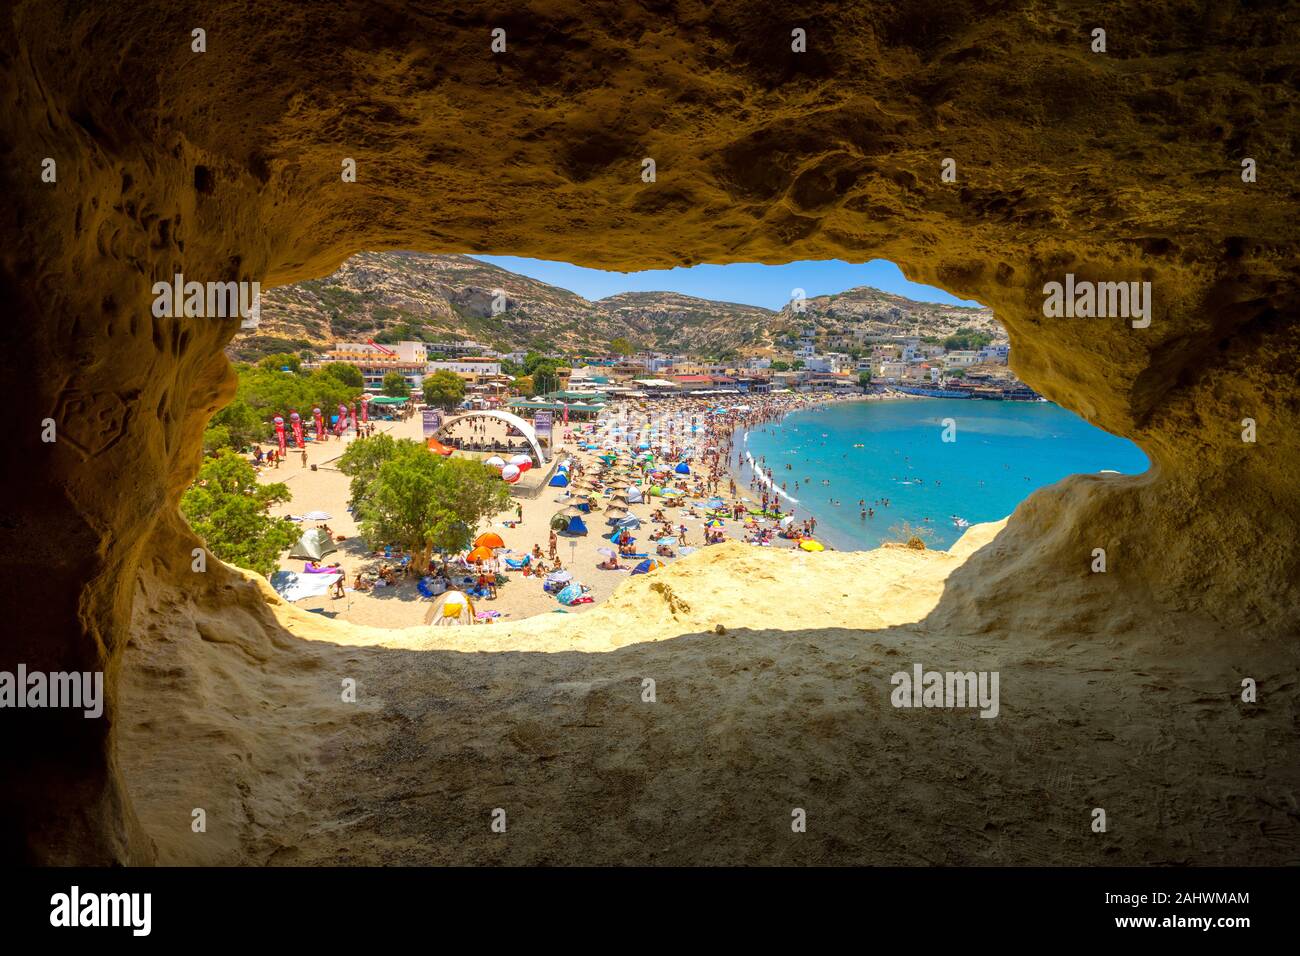 Matala beach with caves on the rocks that were used as a roman cemetery and at the decade of 70's were living hippies, Crete, Greece. Stock Photo